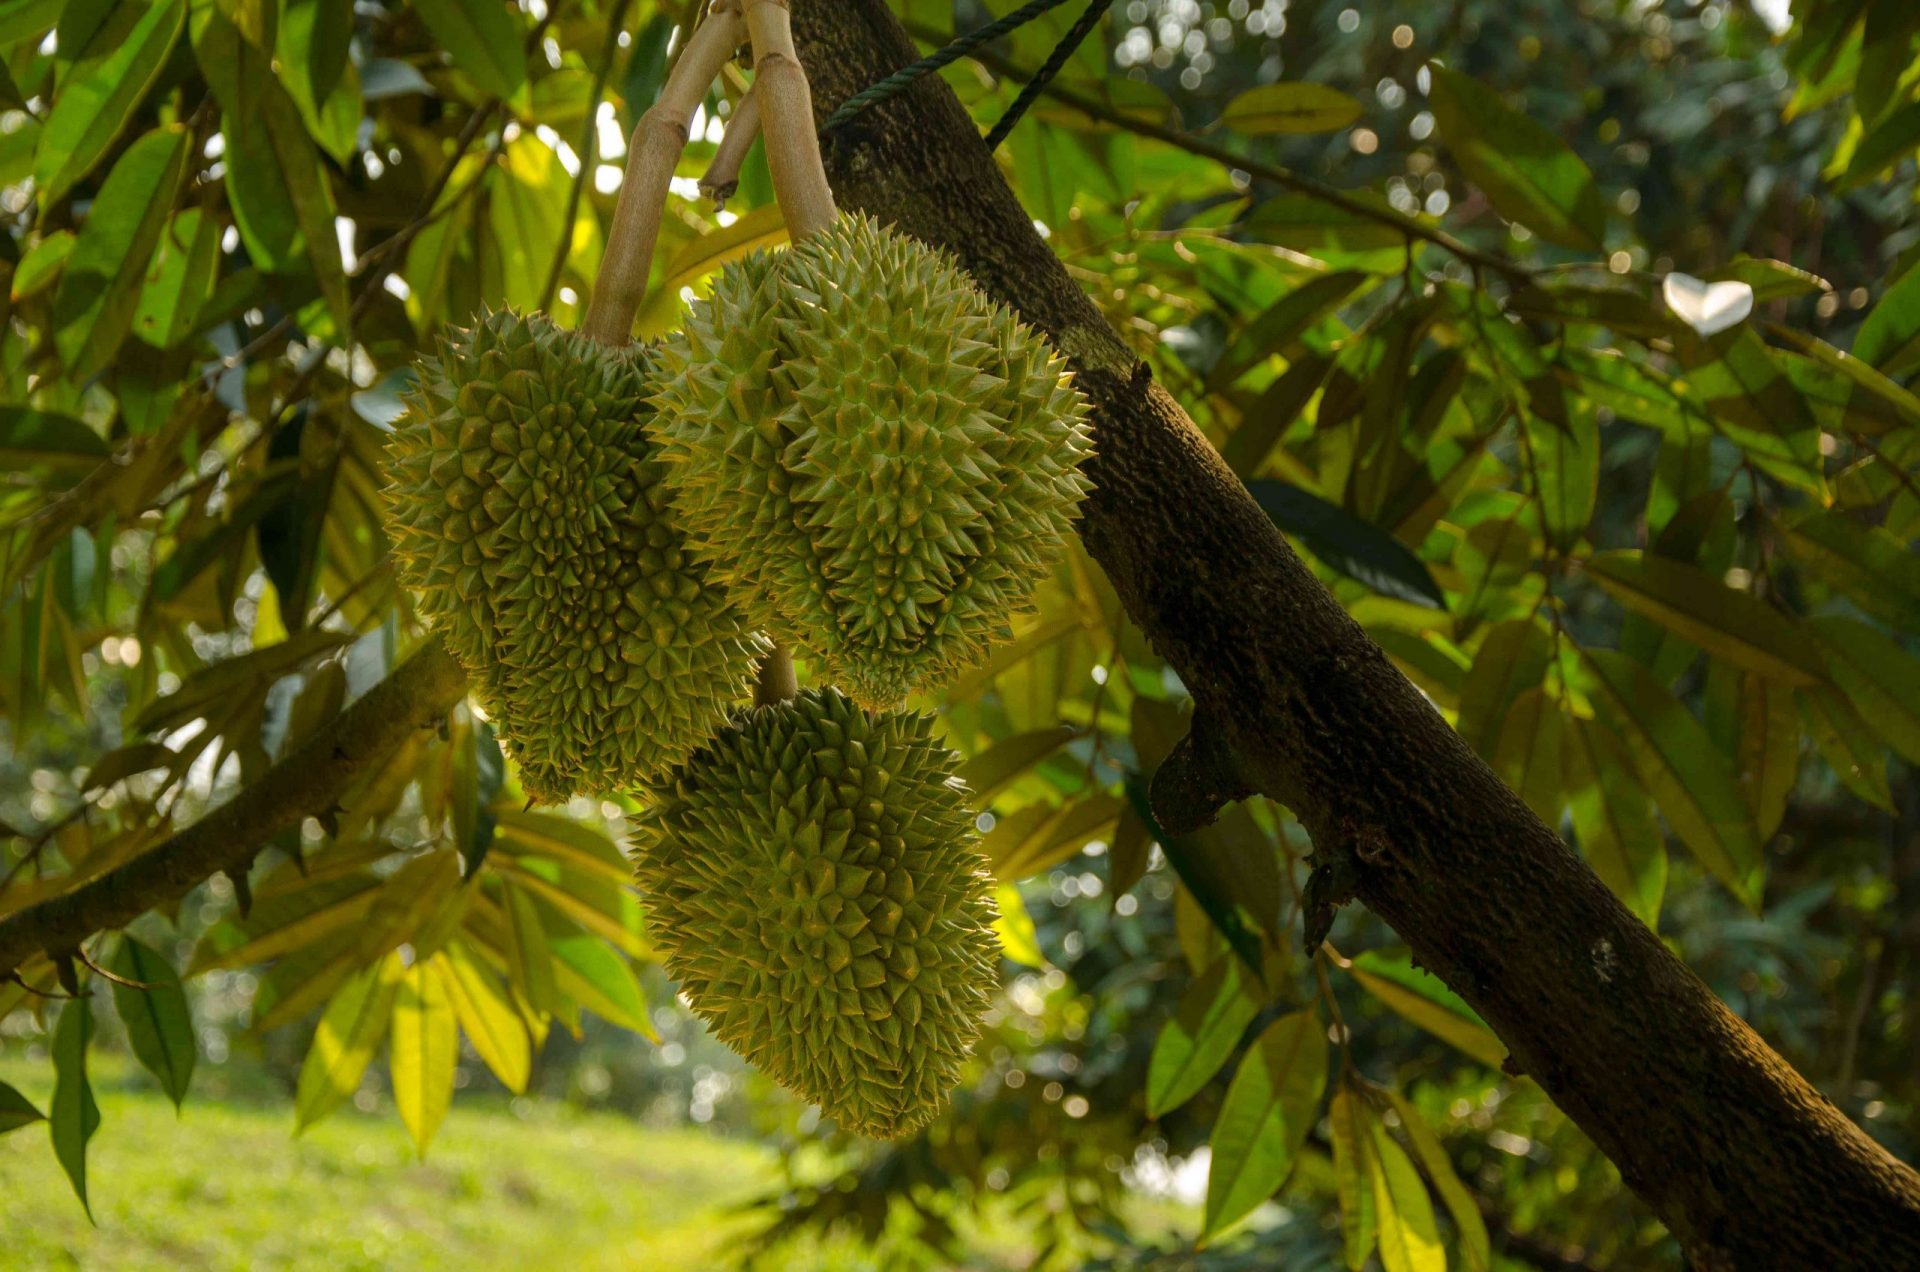 durians growing from a tree in Thailand